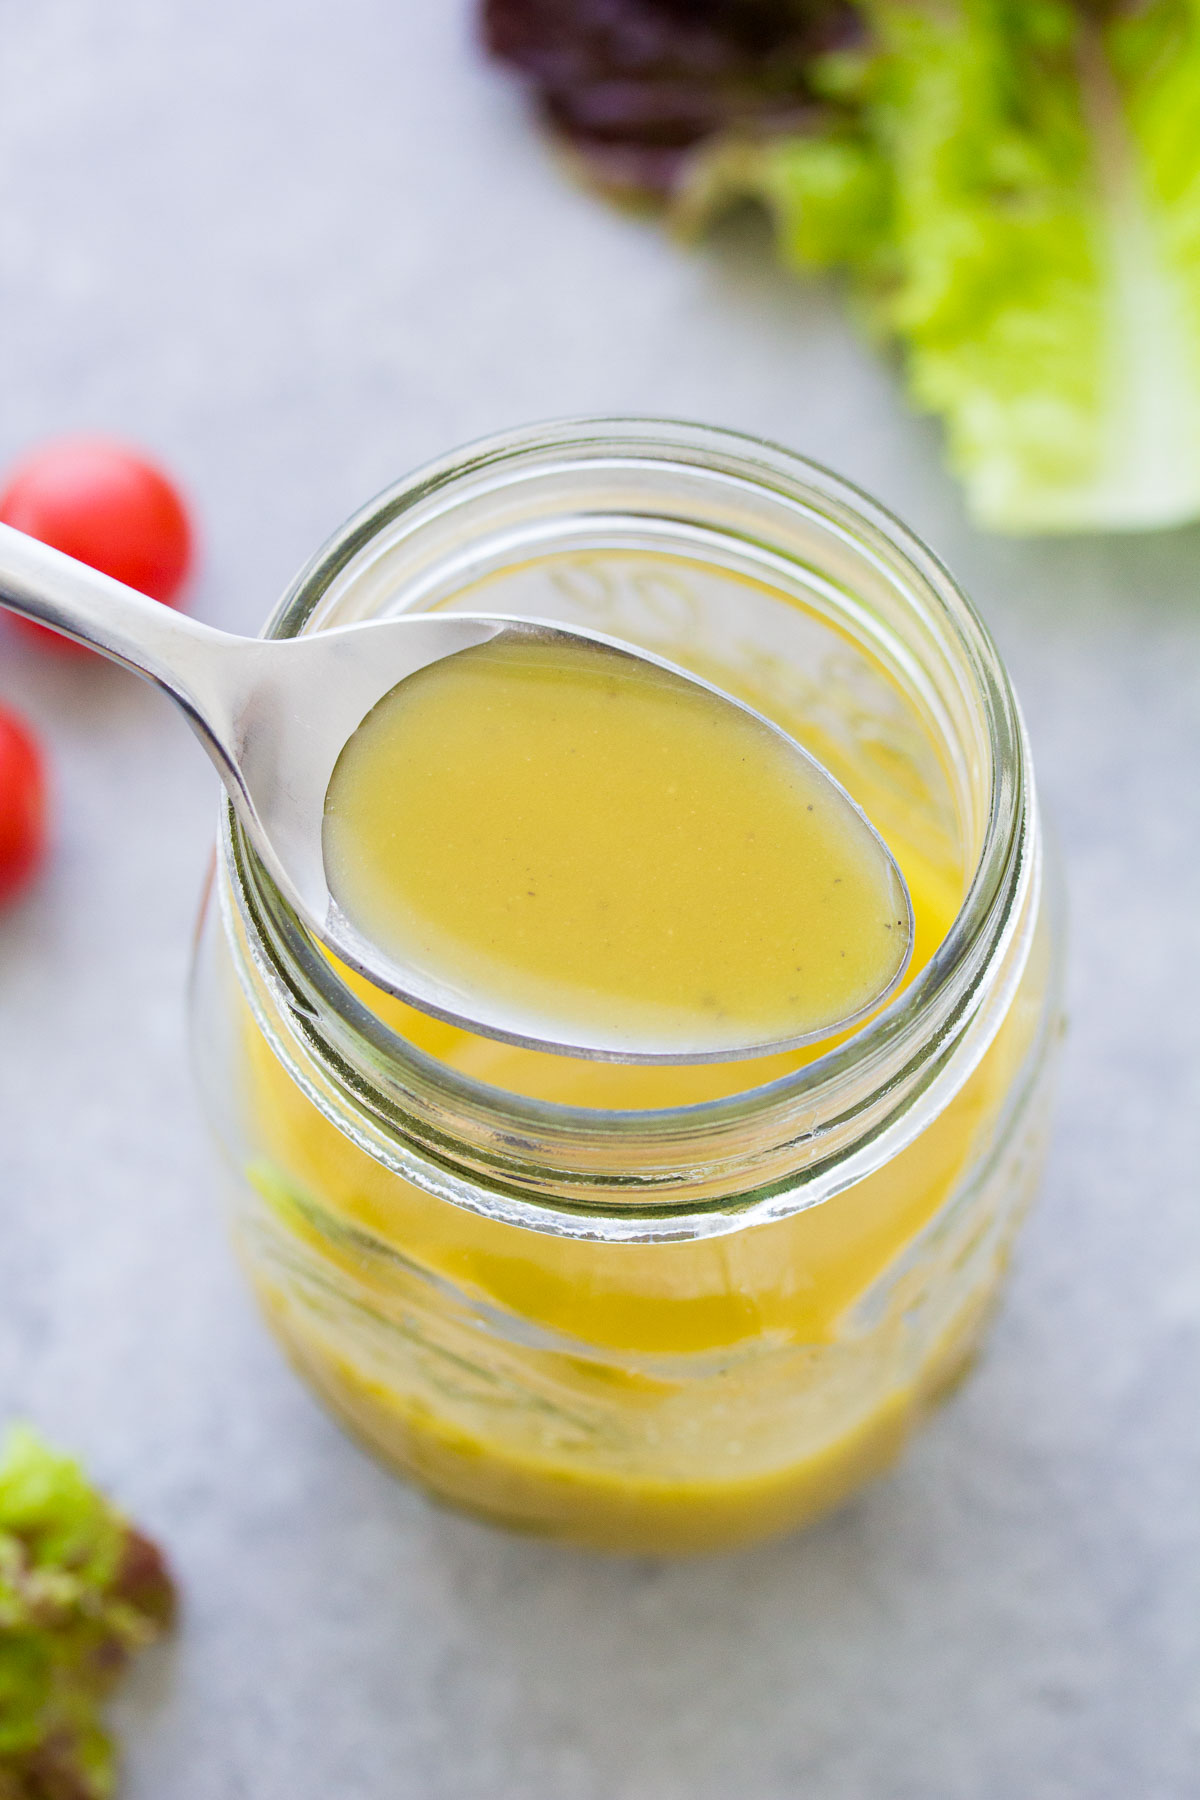 Recipe for Salad Dressing on Greens ⋆ Lone Star Gatherings